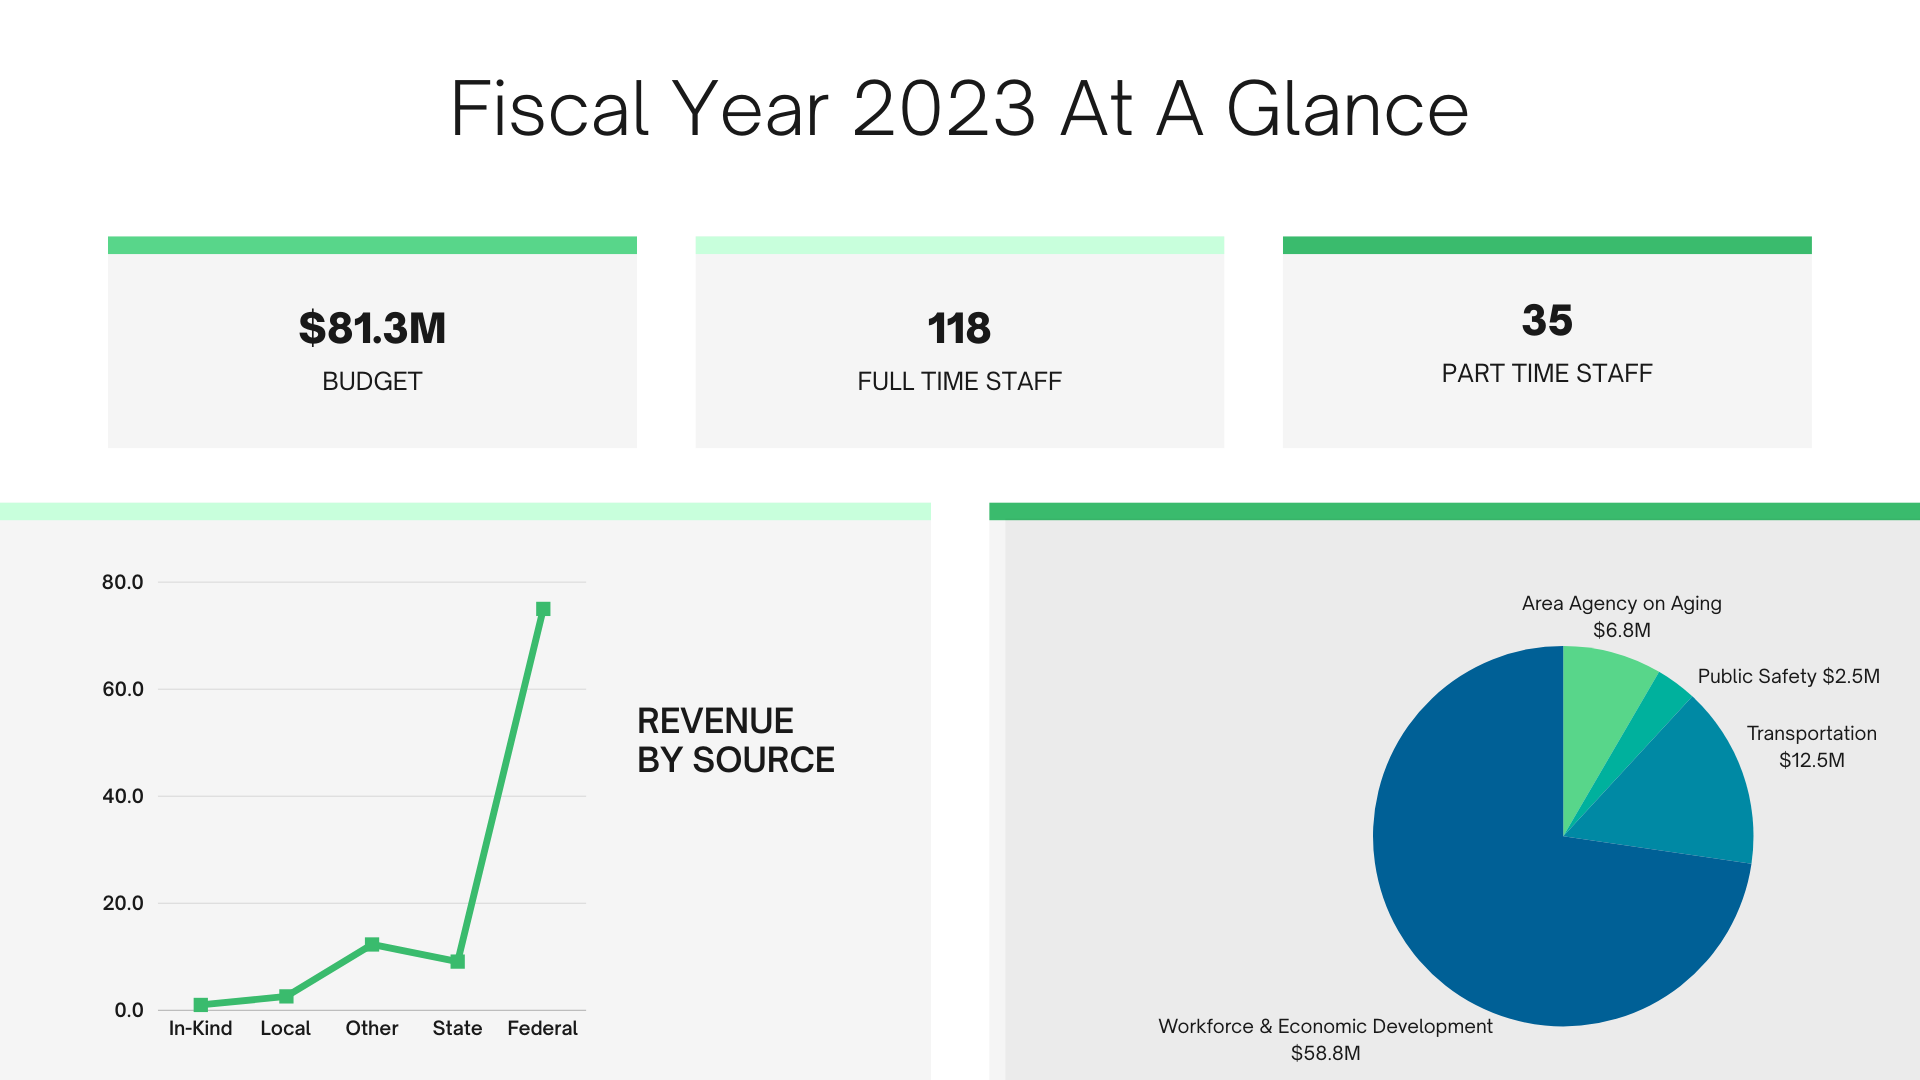 A dashboard showing a graph and a pie chart for fiscal year 2023 at a glance.